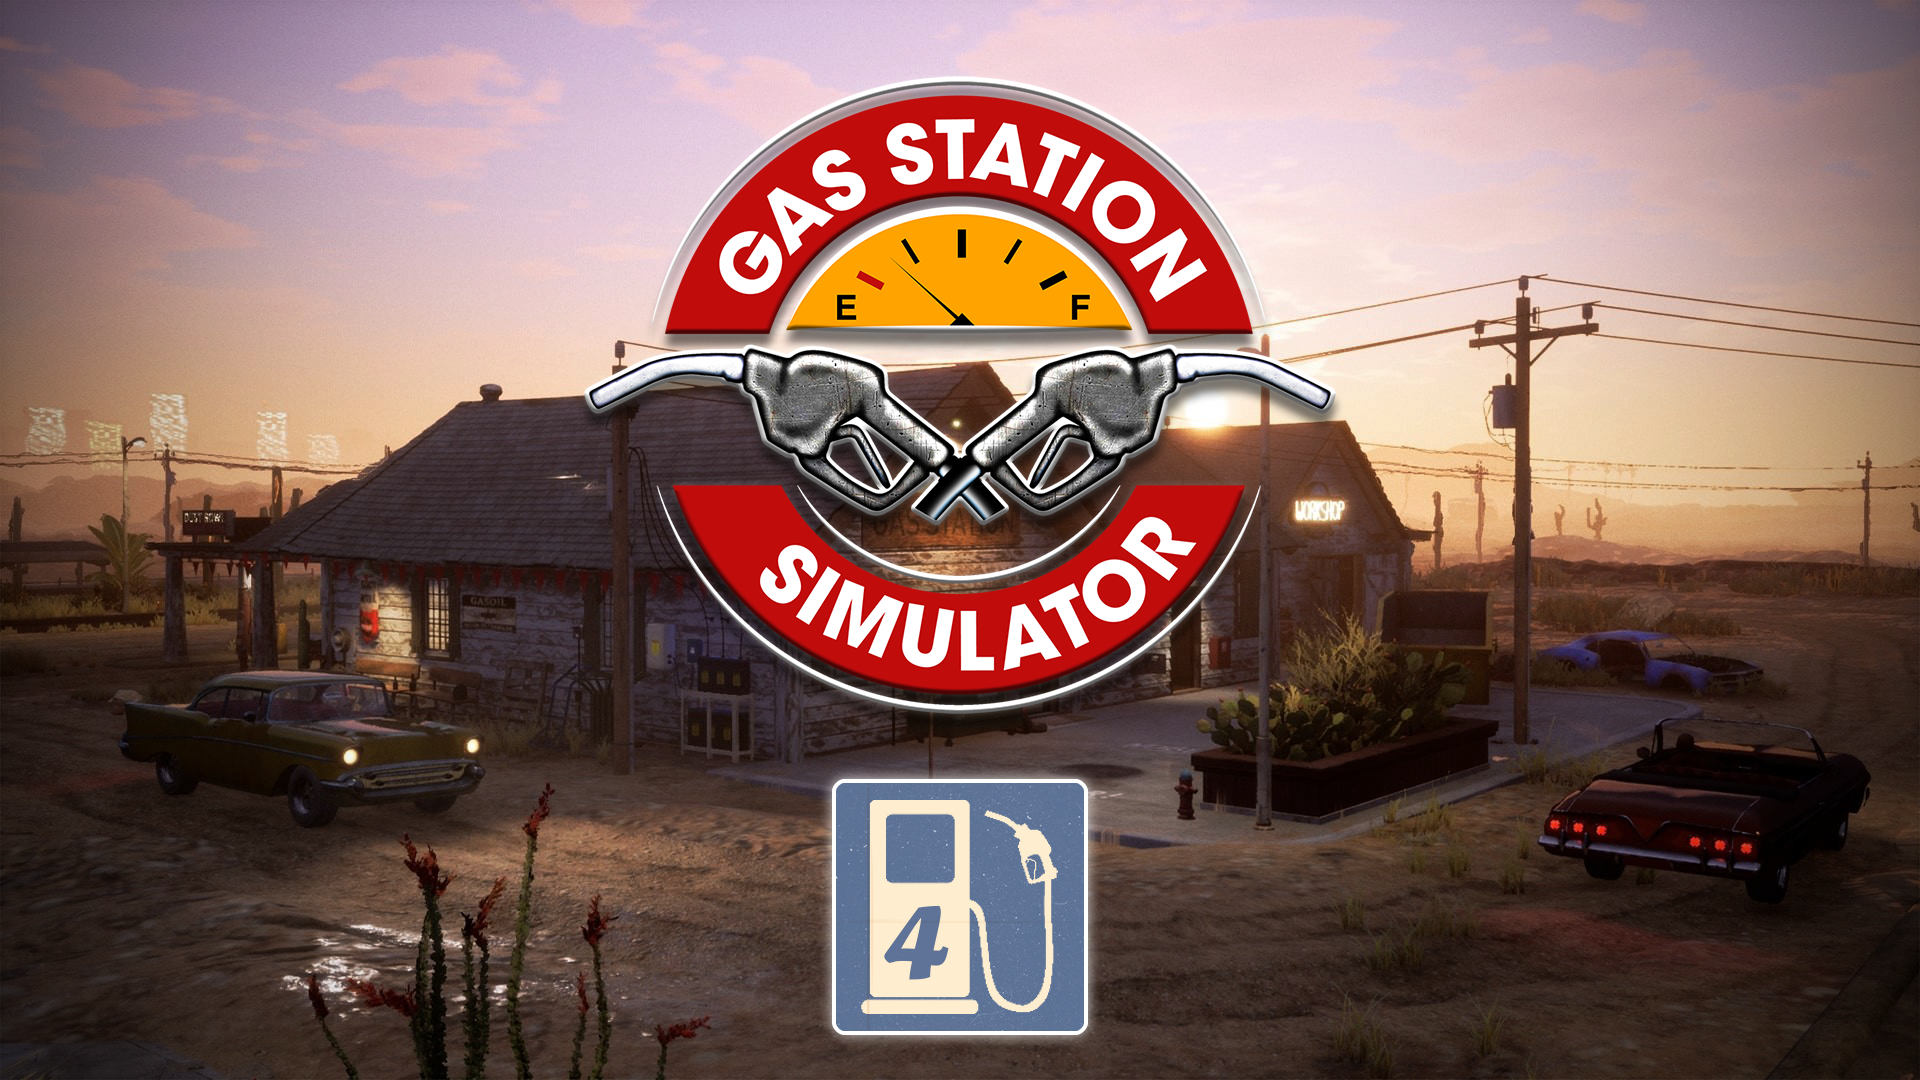 Icon for Station Lvl. 4